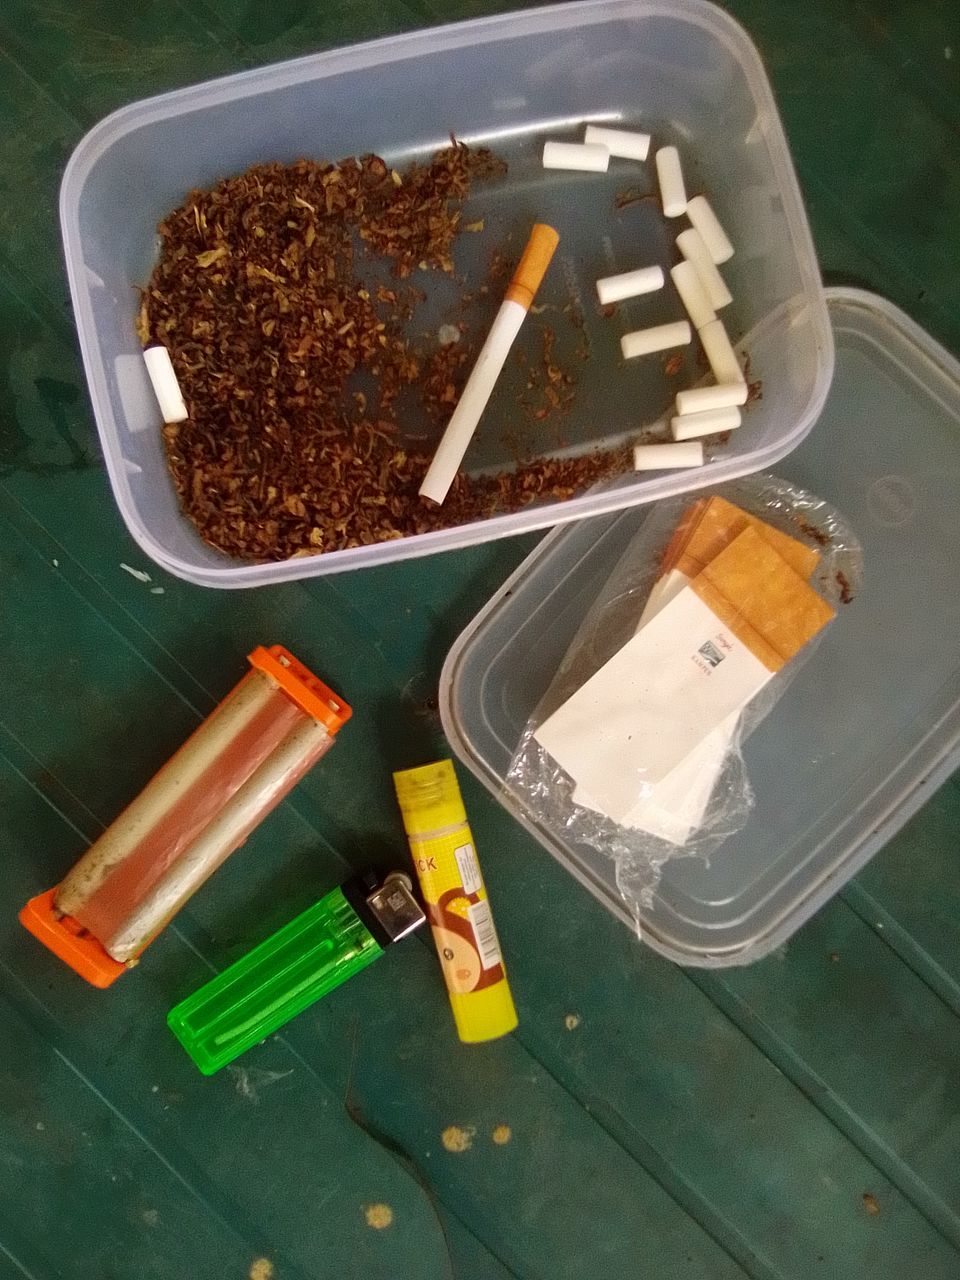 HIGH ANGLE VIEW OF CIGARETTE IN CONTAINER ON TABLE